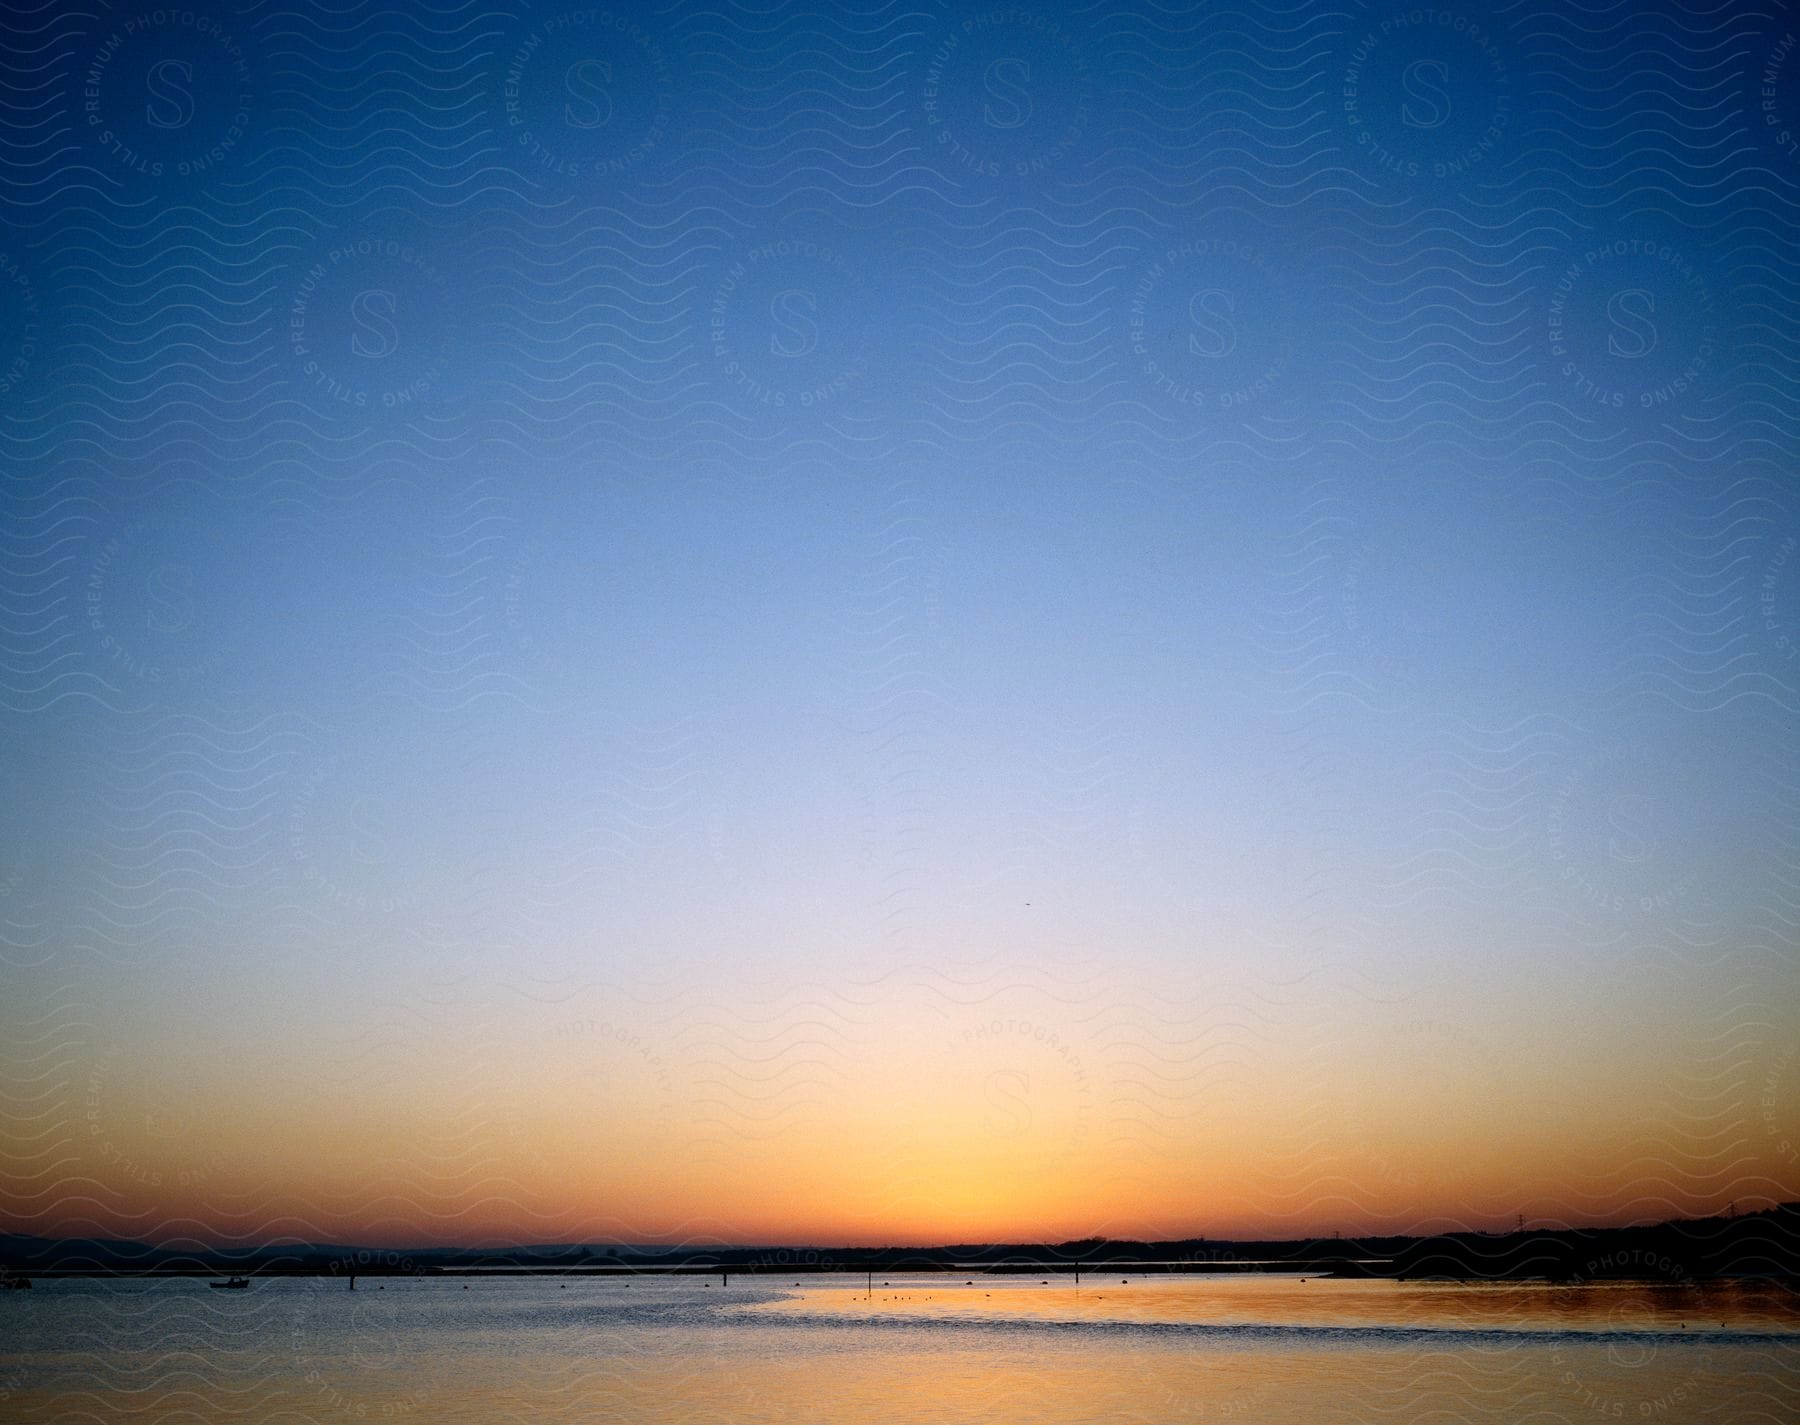 A natural landscape of a beach at dusk with colorful orange sky and water reflection